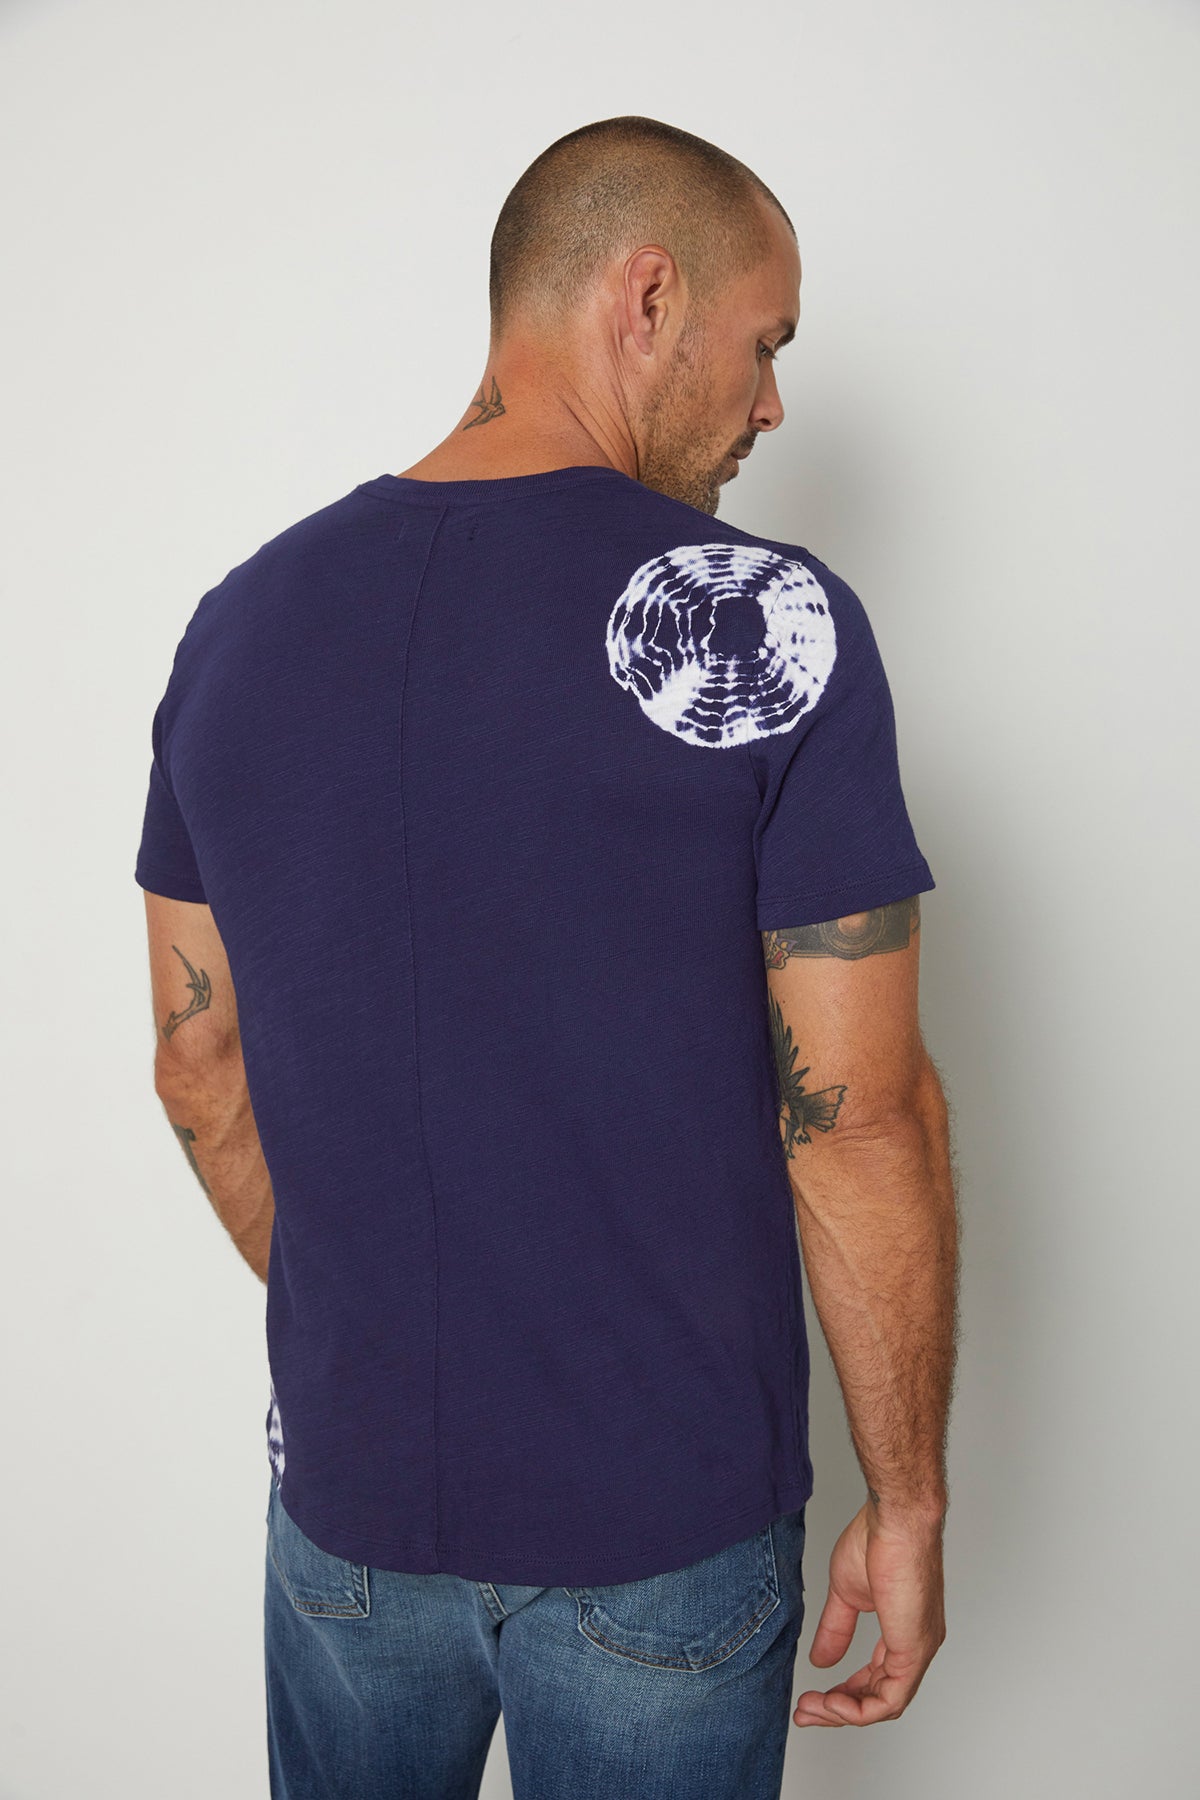   Asher in navy back tee 